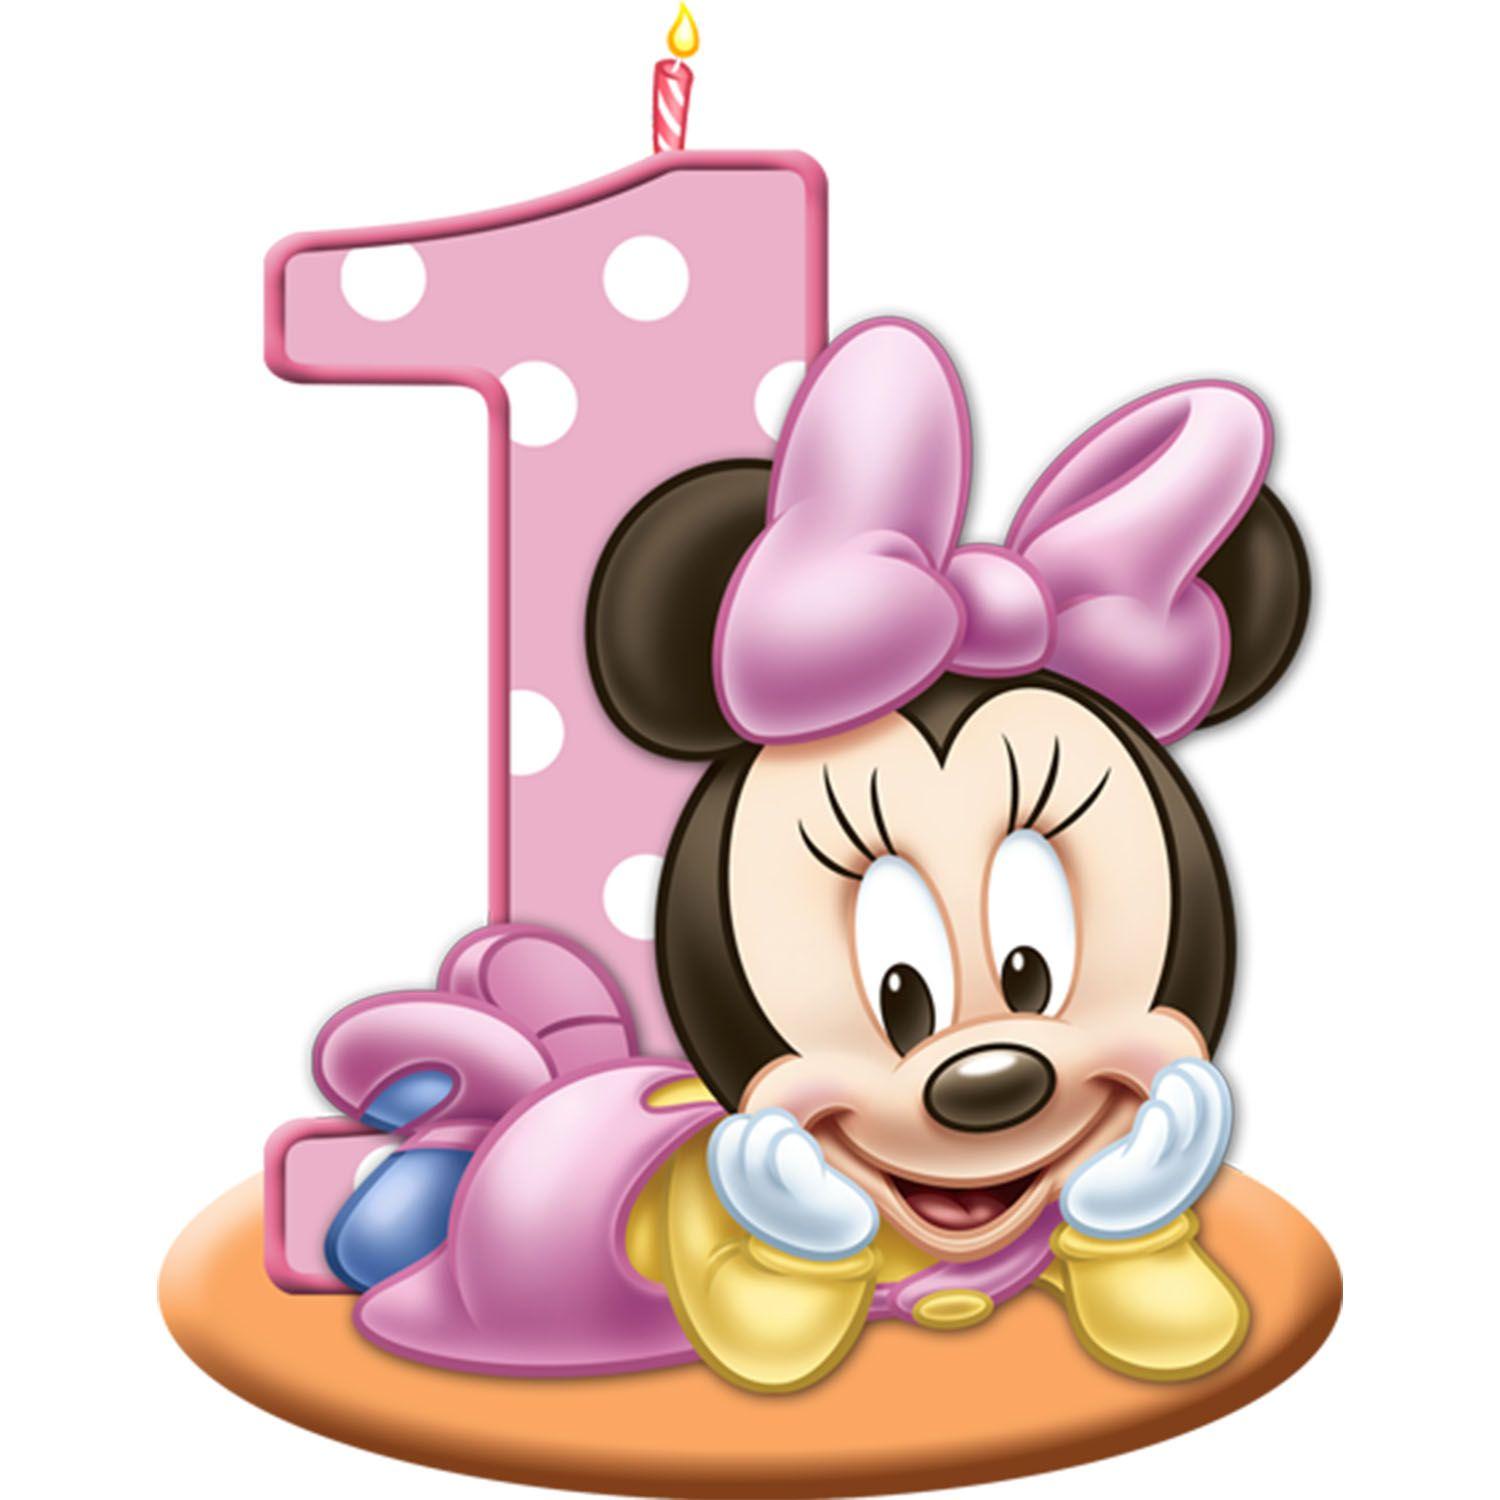 Mickey Mouse clipart birthday cake and in color mickey